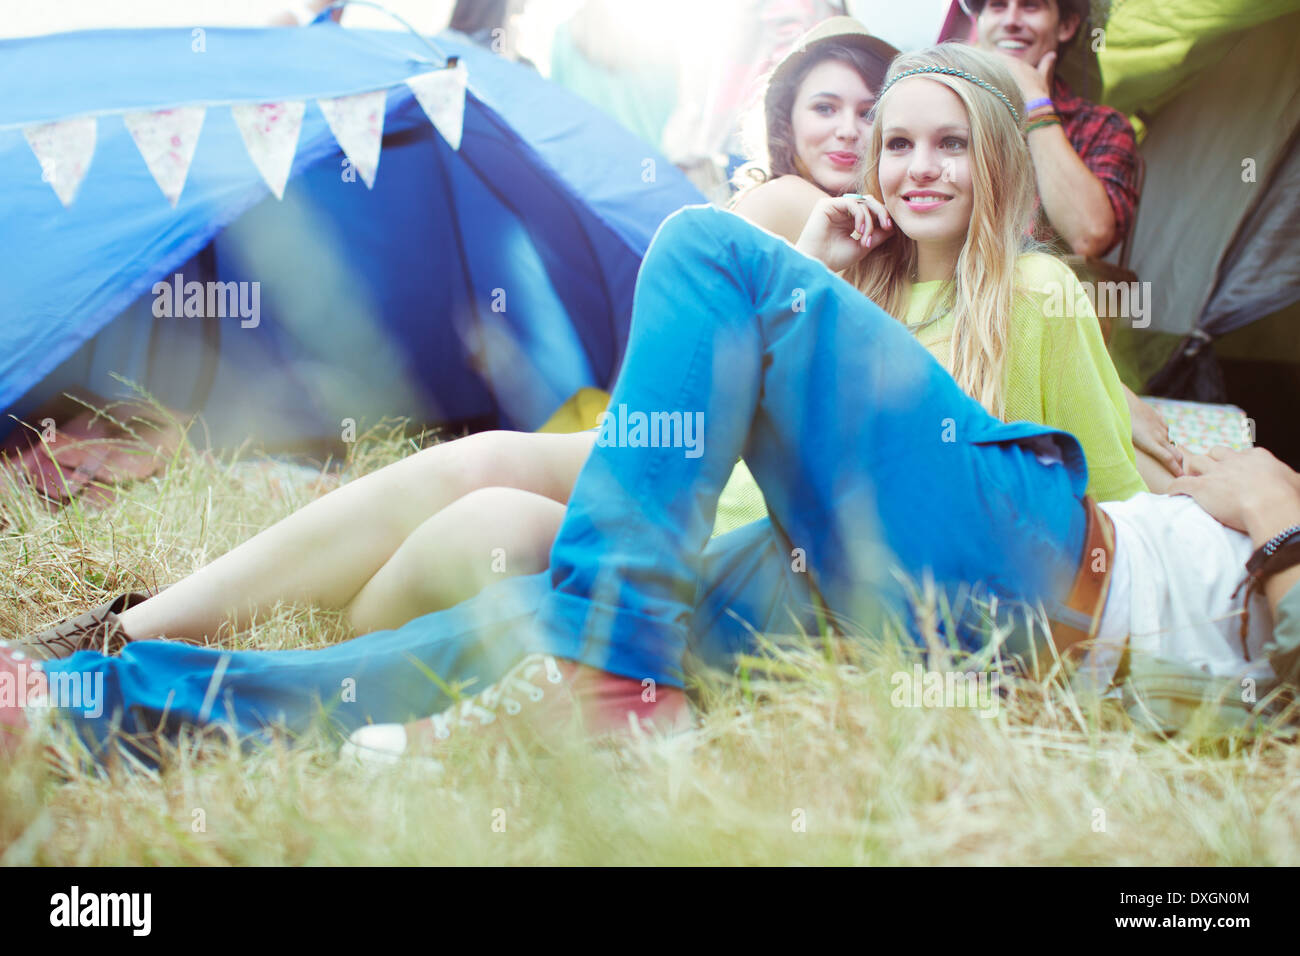 Friends relaxing outside tents at music festival Stock Photo